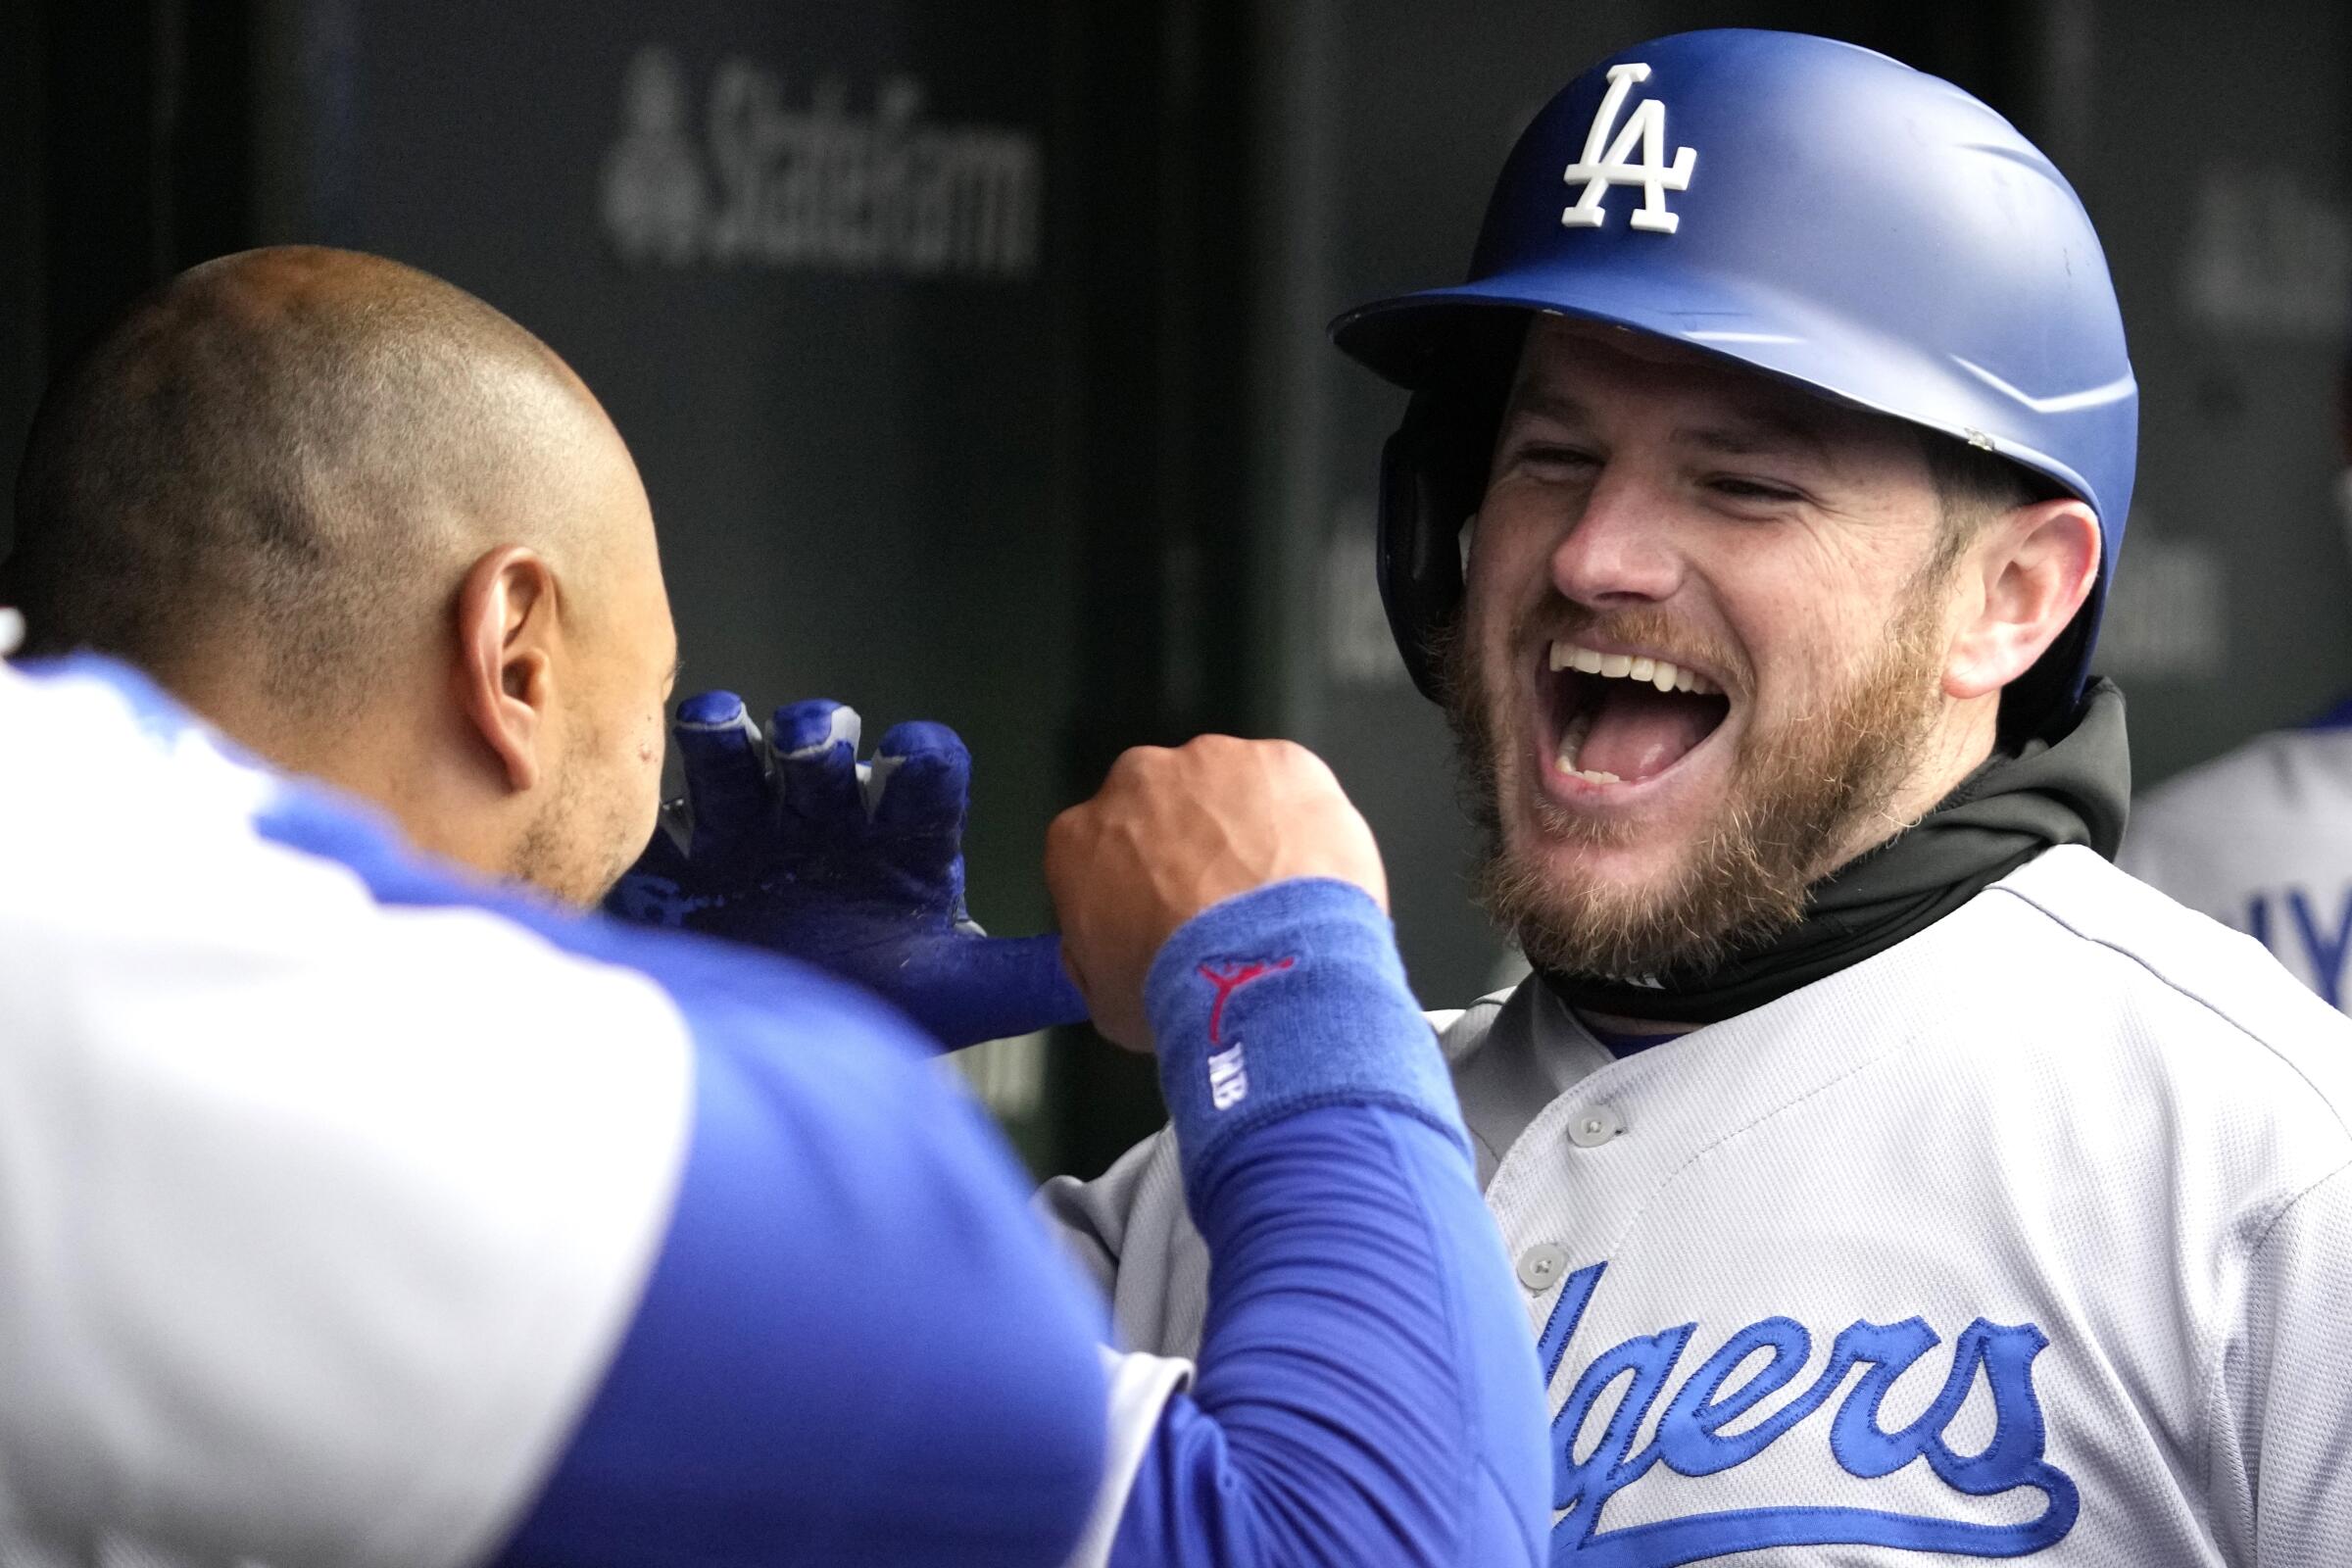 Max Muncy, right, celebrates with Mookie Betts after hitting a two-run home run for the Dodgers against the Chicago Cubs.